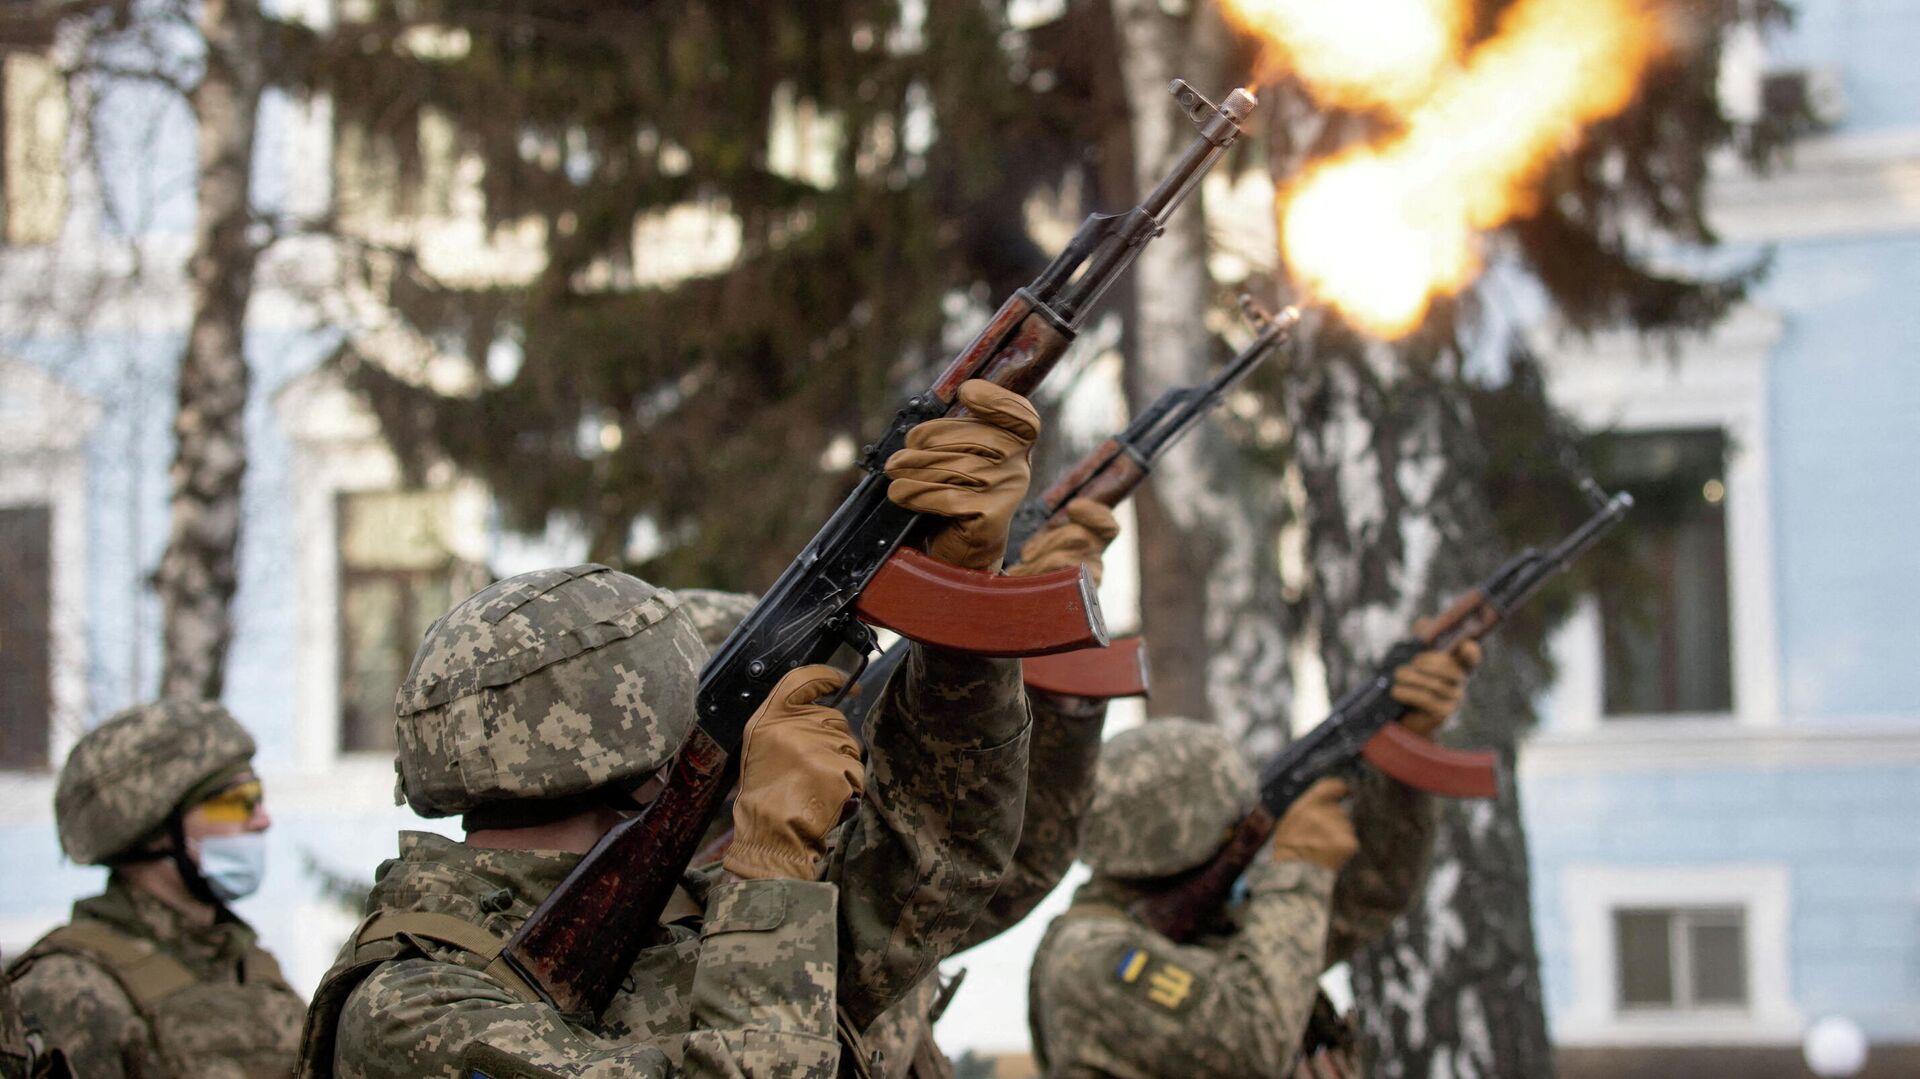 Service members fire a salute during a ceremony in tribute to fallen defenders of Ukraine, including the soldiers killed during a battle with pro-Russian rebels for the Donetsk airport this day in 2015, at a memorial near the headquarters of the Defence Ministry in Kyiv, Ukraine January 20, 2022. - Sputnik International, 1920, 27.01.2022